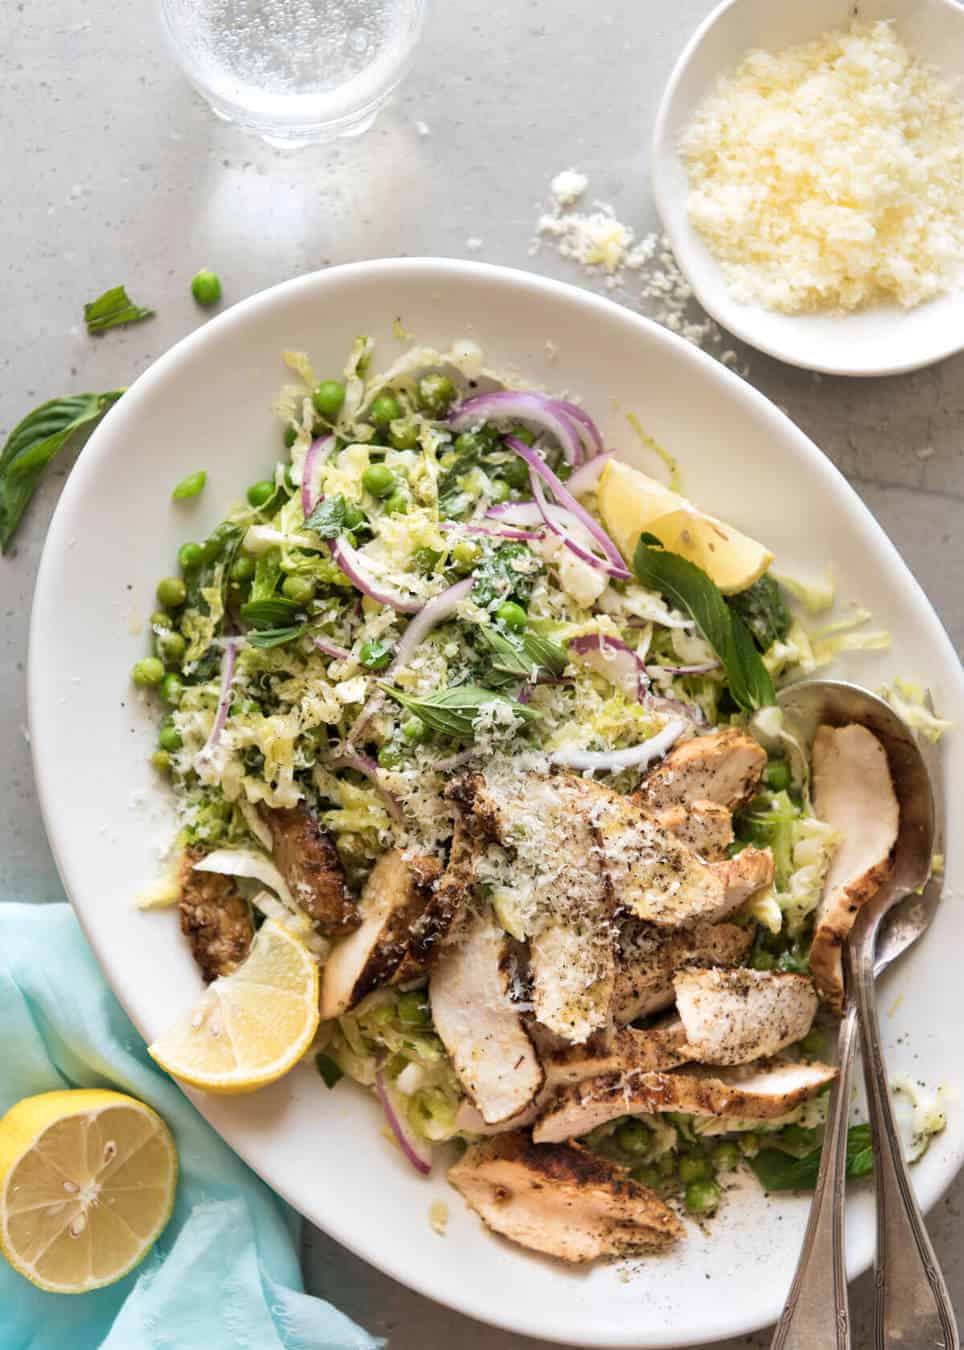 Lemon Parmesan Cabbage Salad with Grilled Chicken - A fabulous utterly addictive salad that you just can't stop eating! recipetineats.com